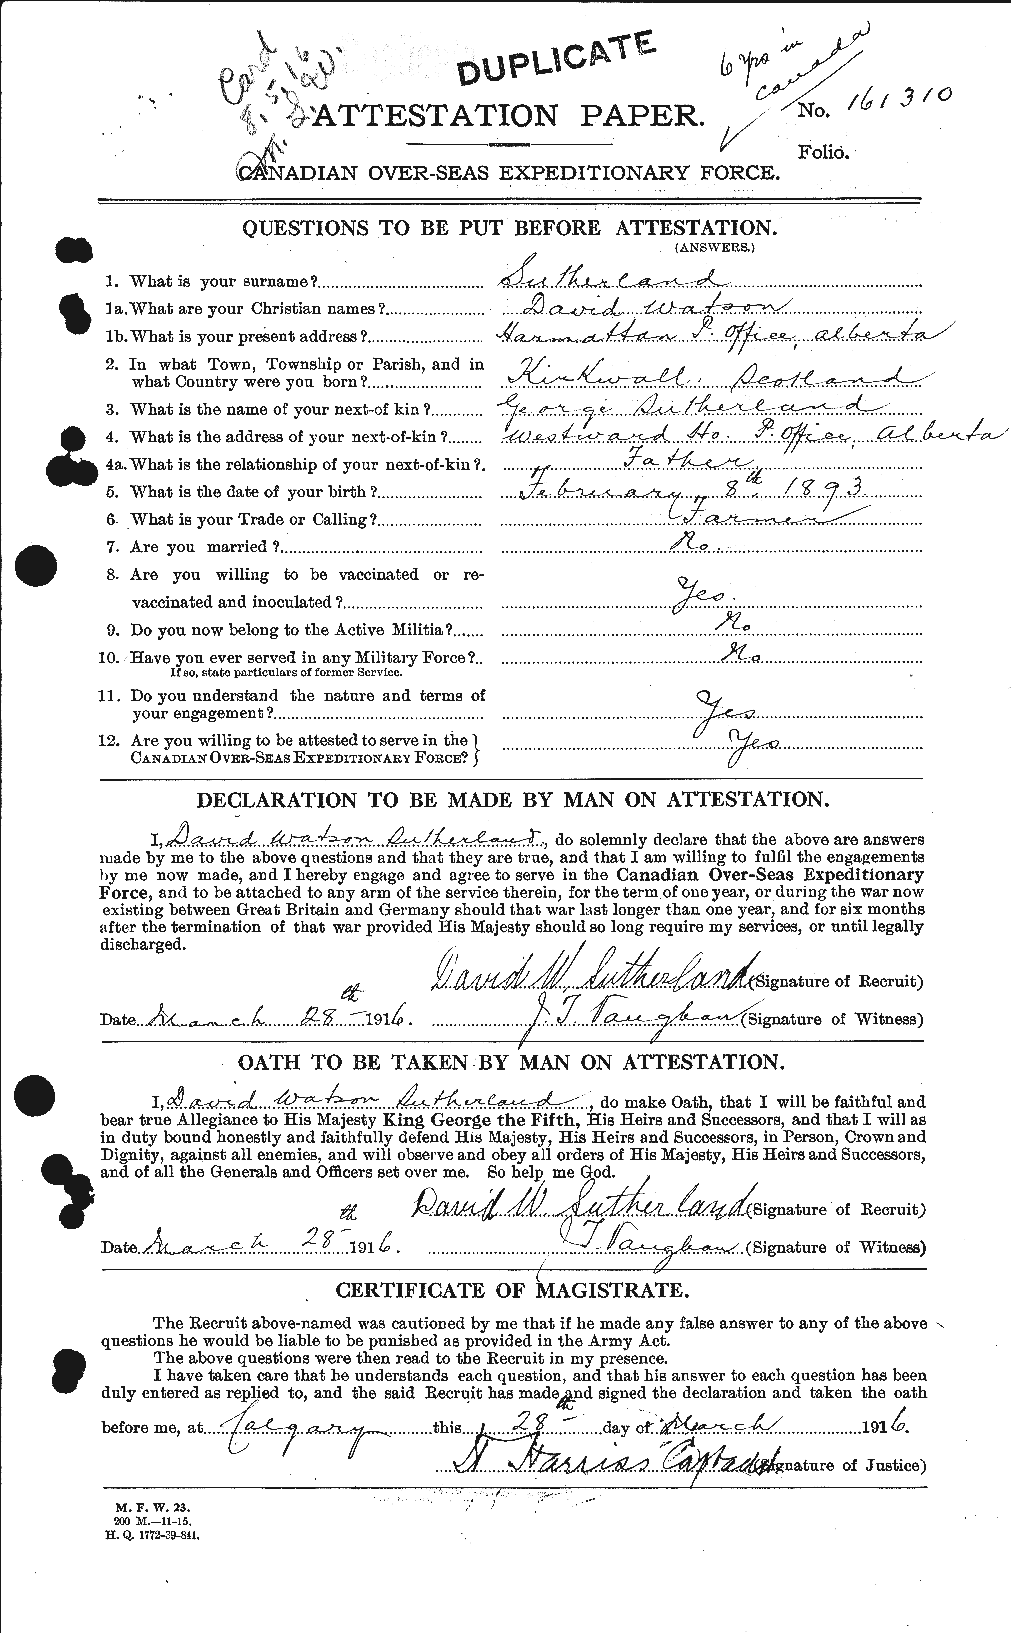 Personnel Records of the First World War - CEF 124930a